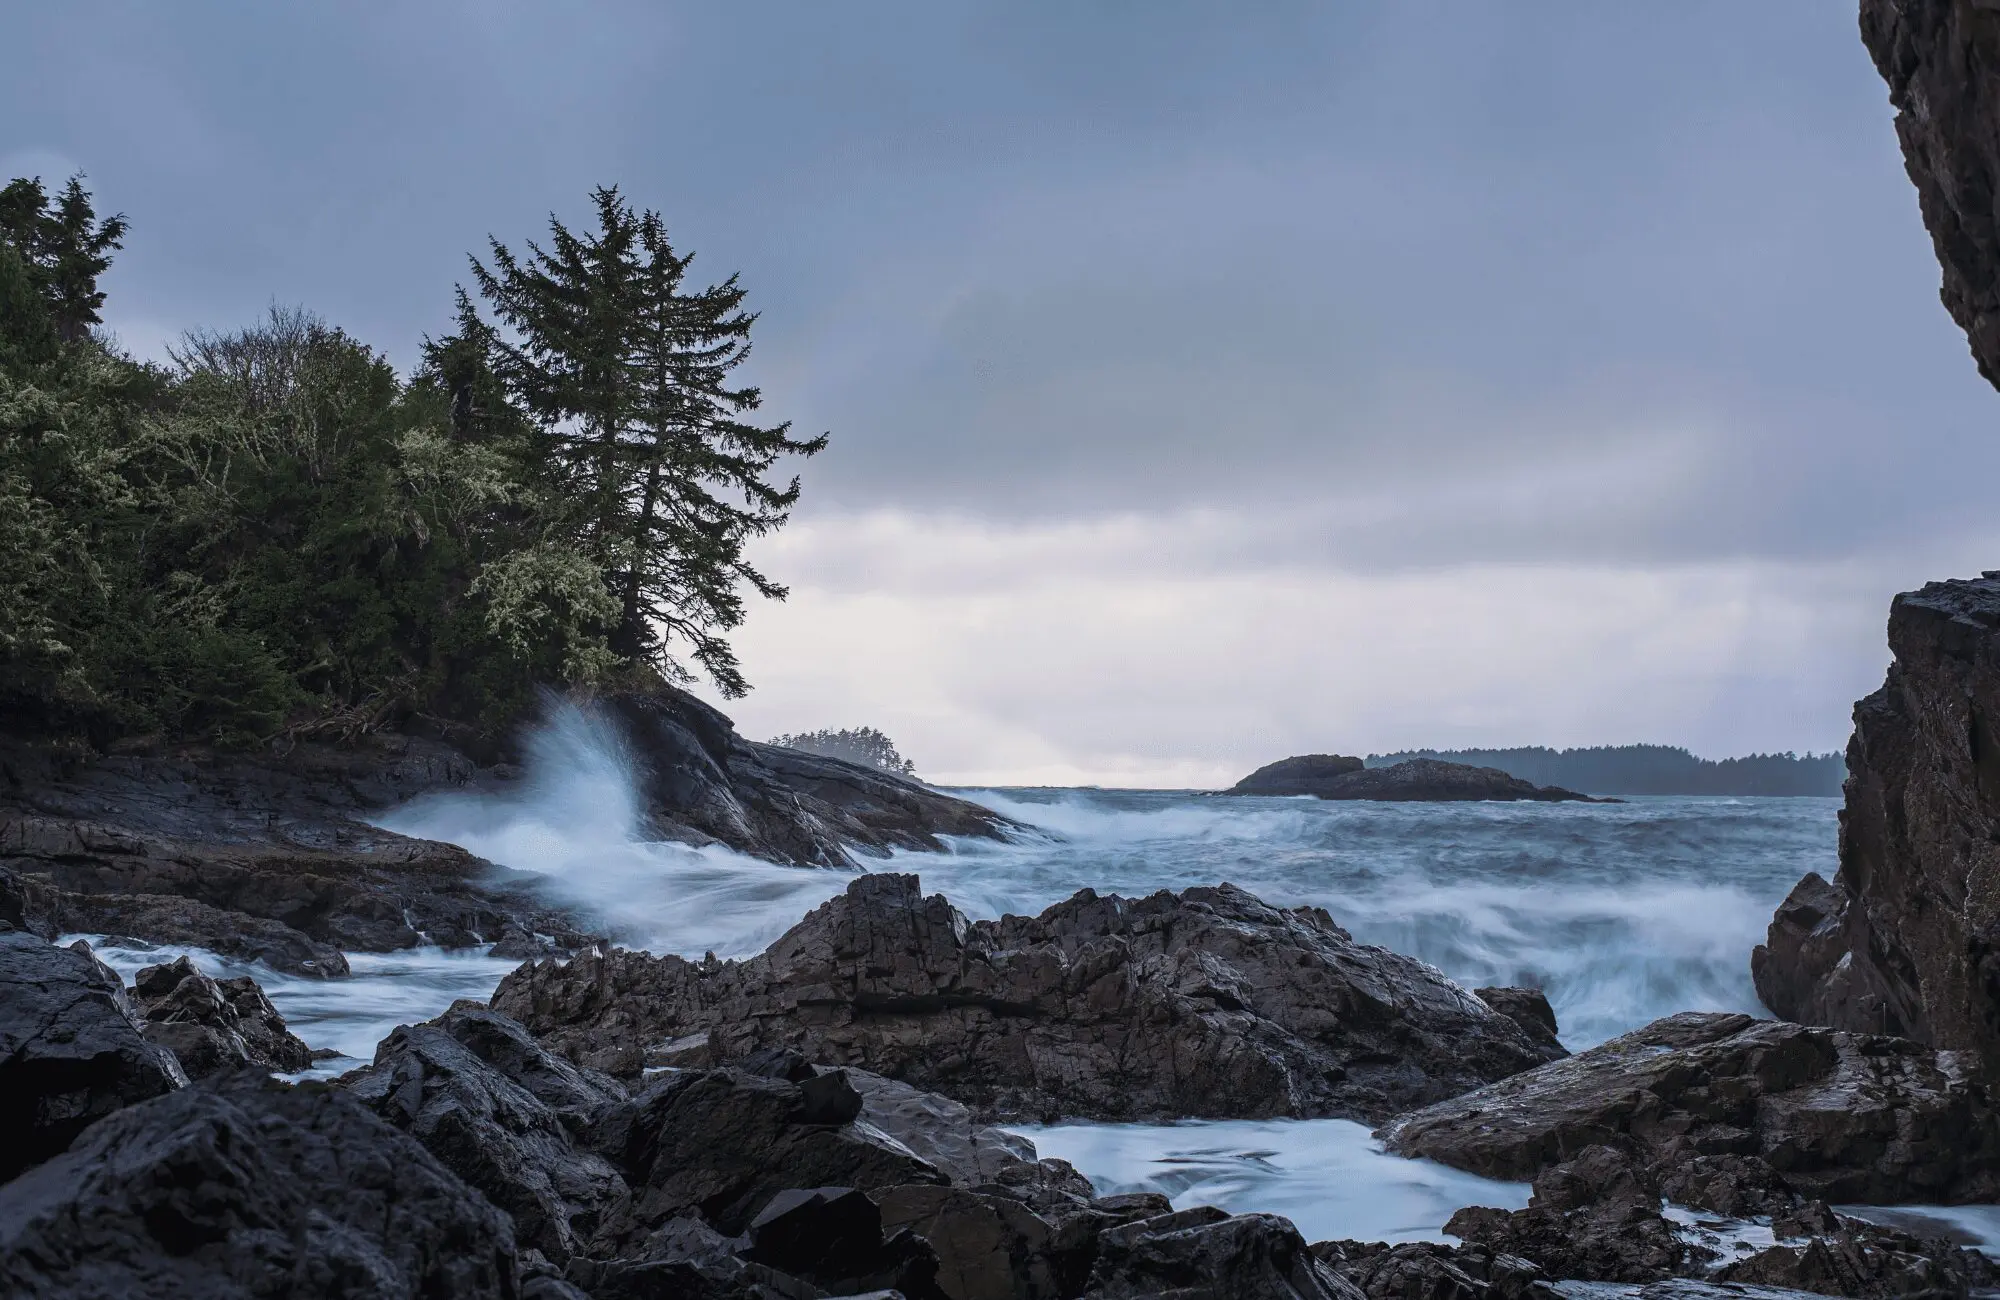 Tofino Wildlife, Trails, Natural Attractions and More